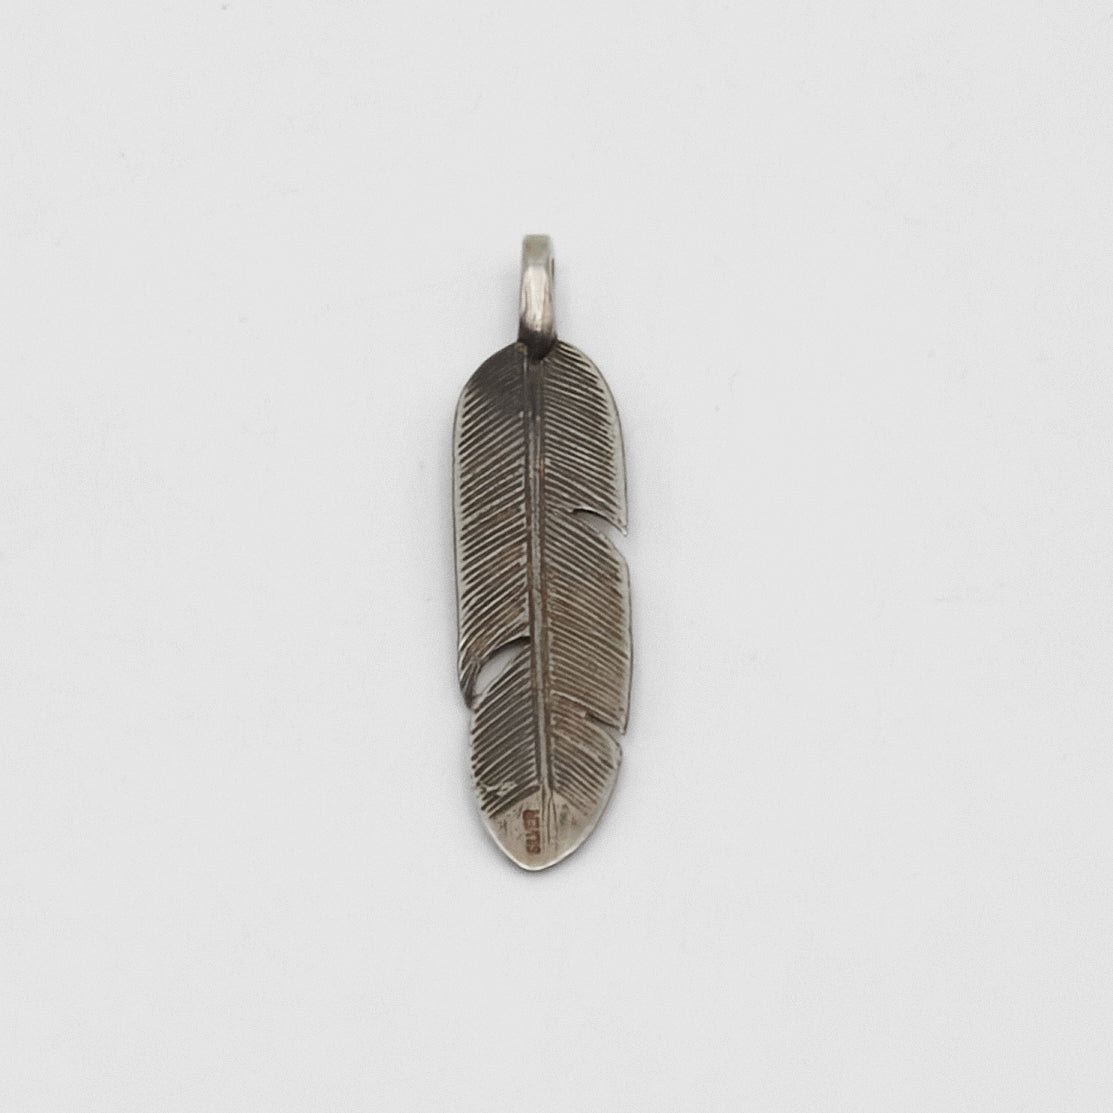 Vintage Jewelry Small Feather Pendant